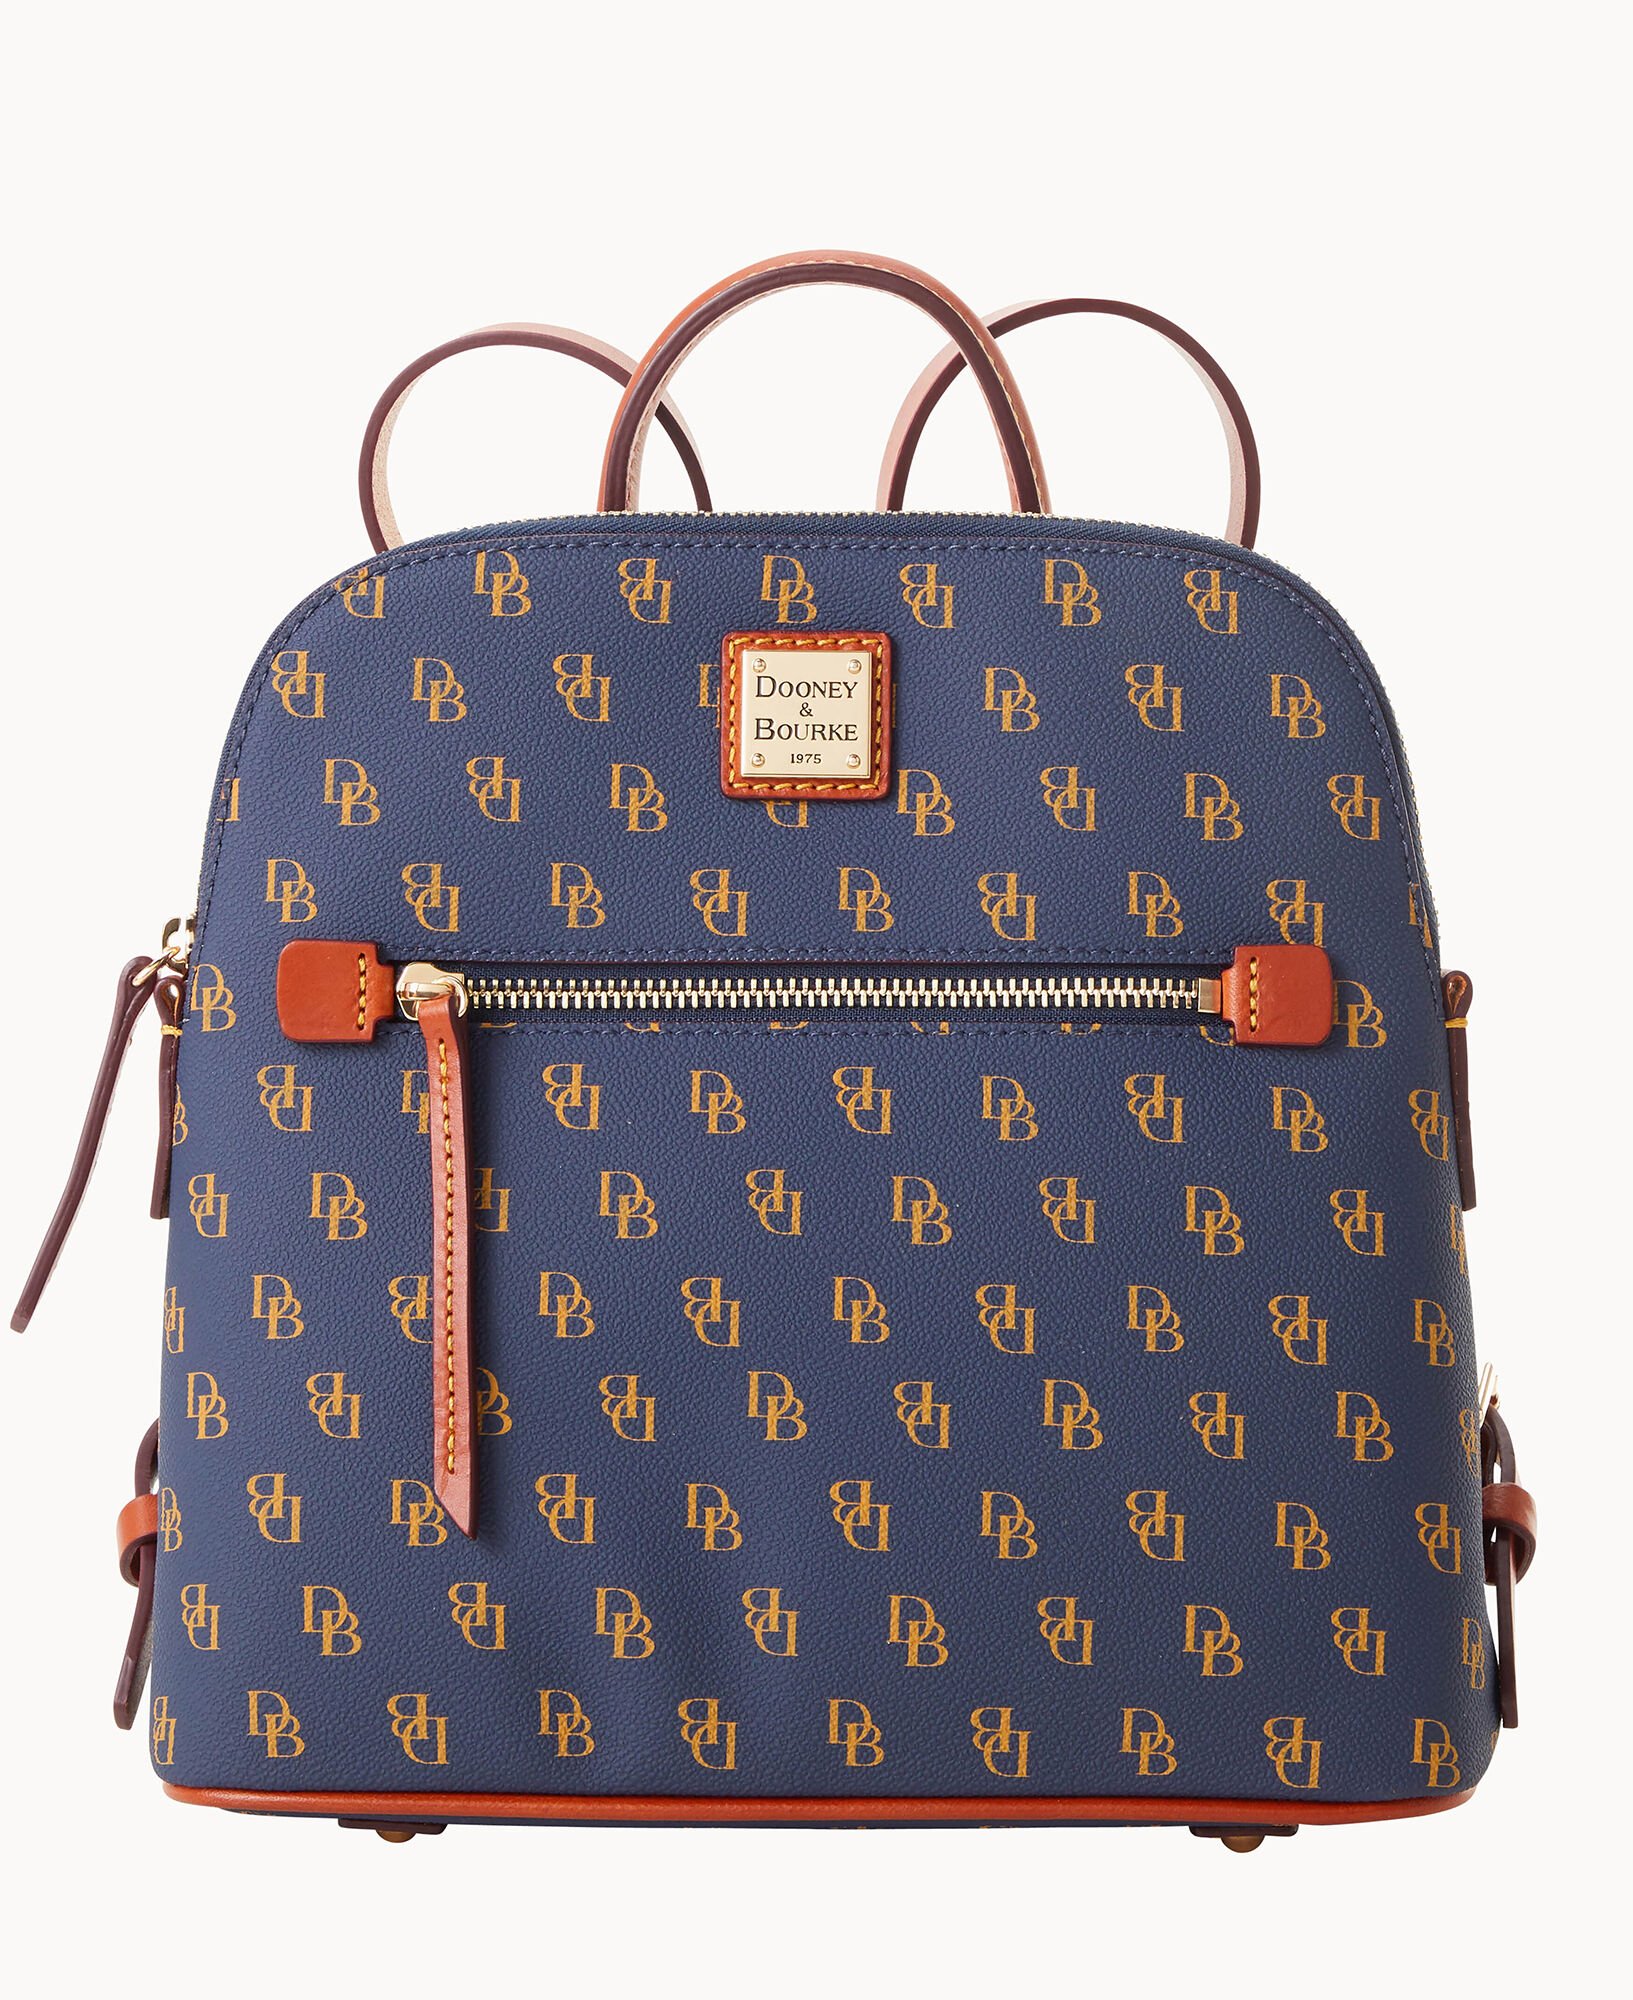 Louis Vuitton Neverfull Bags for sale in El Paso, Texas